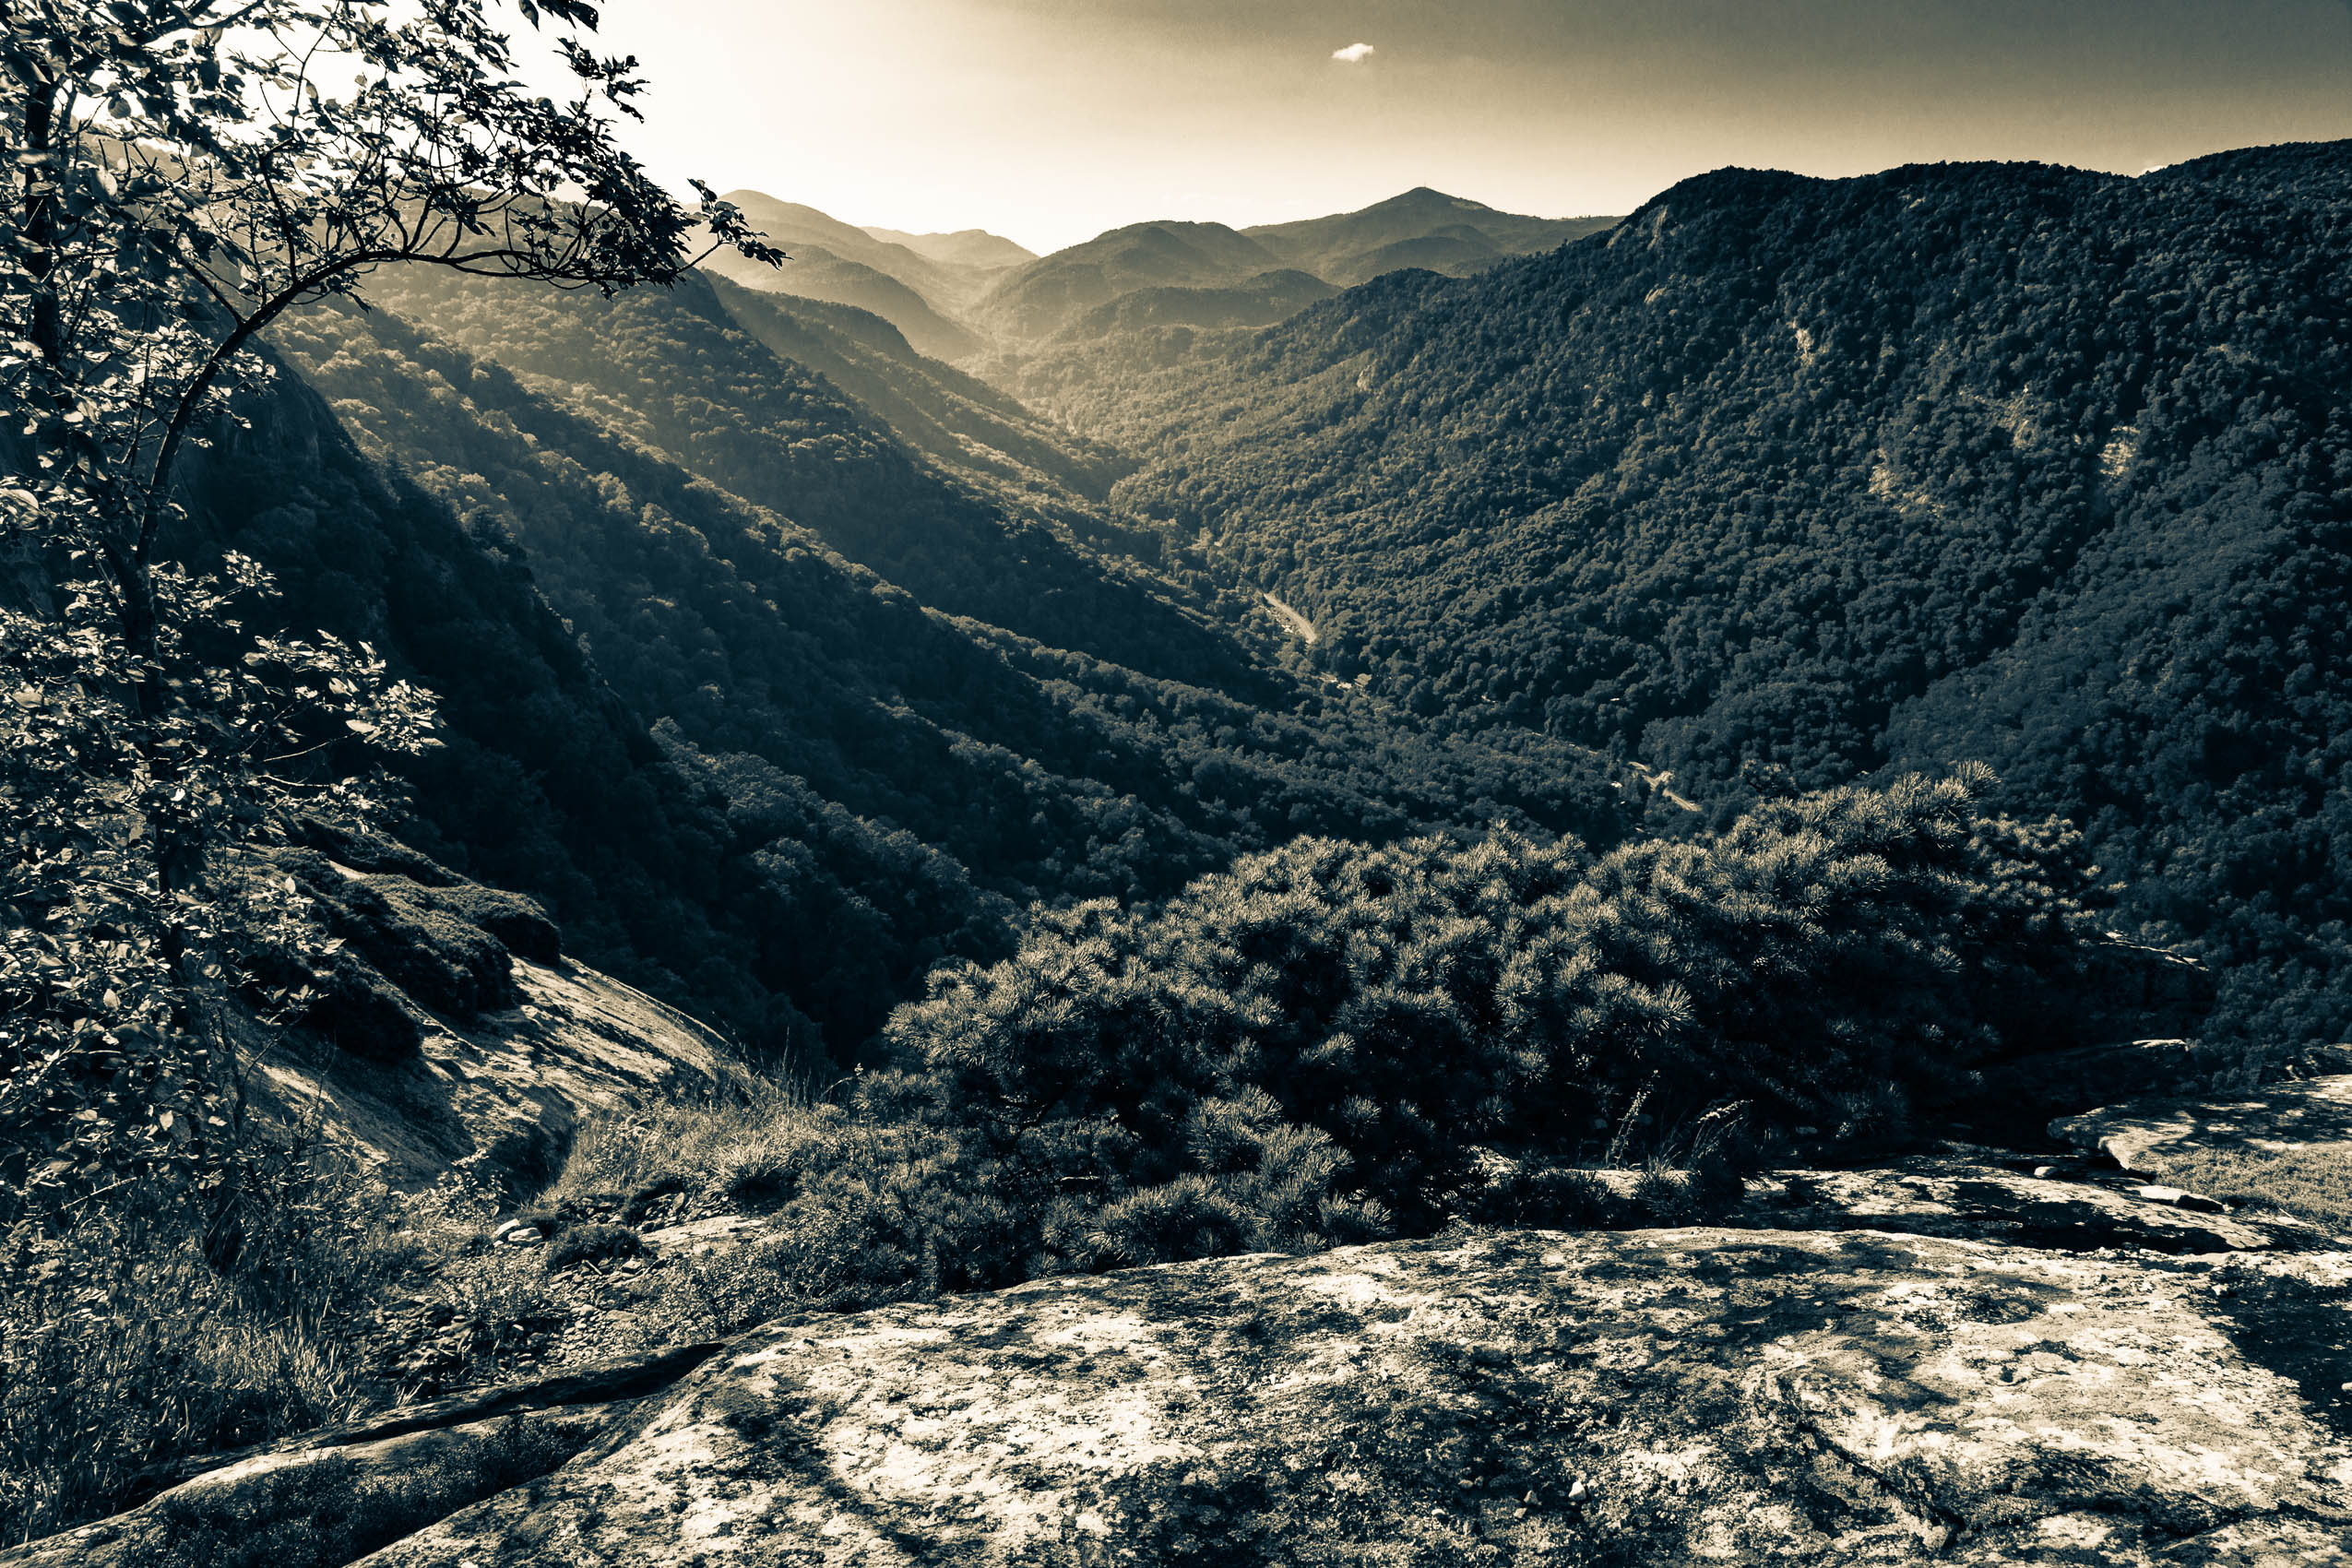 The view up Hickory Nut Gorge from Exclamation Point above Chimney Rock, North Carolina, USA. CM005